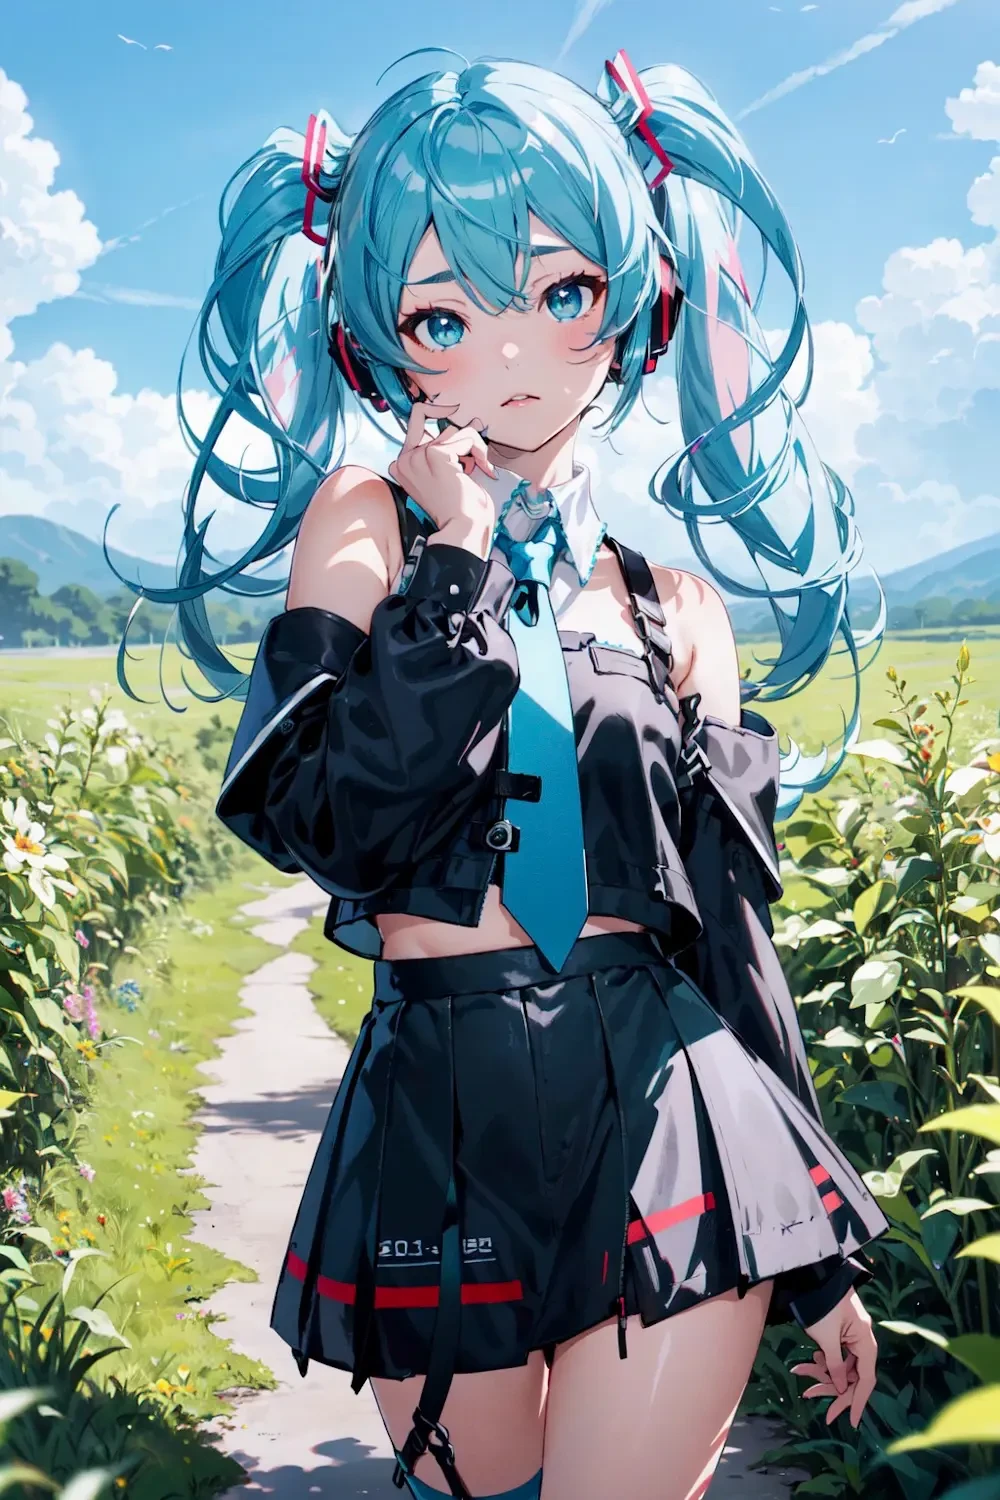 hatsune-miku-anime-style-all-ages-26